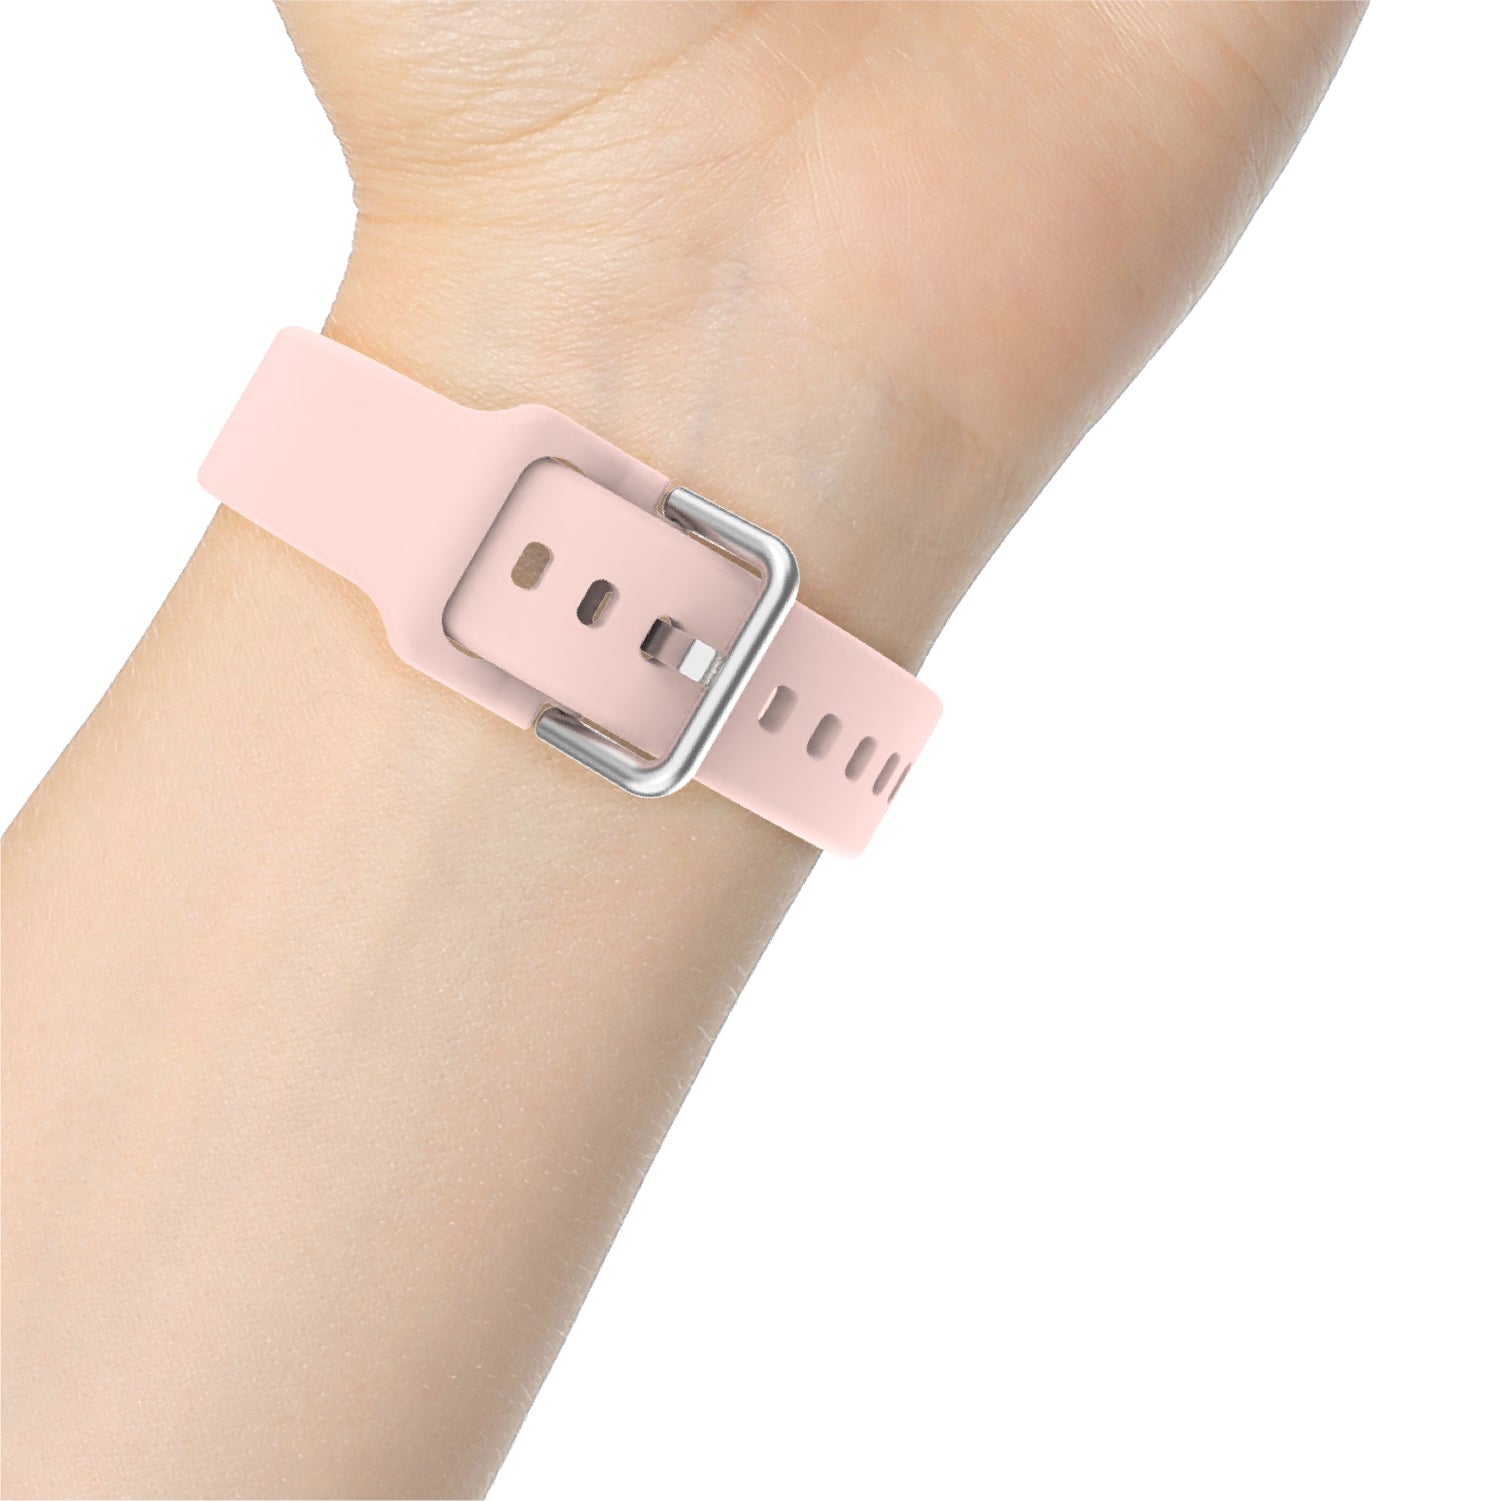 iTouch Air 3 40mm, Sport 3 & Sport Extra Interchangeable Strap: Narrow Blush SIlicone affordable smart watch strap